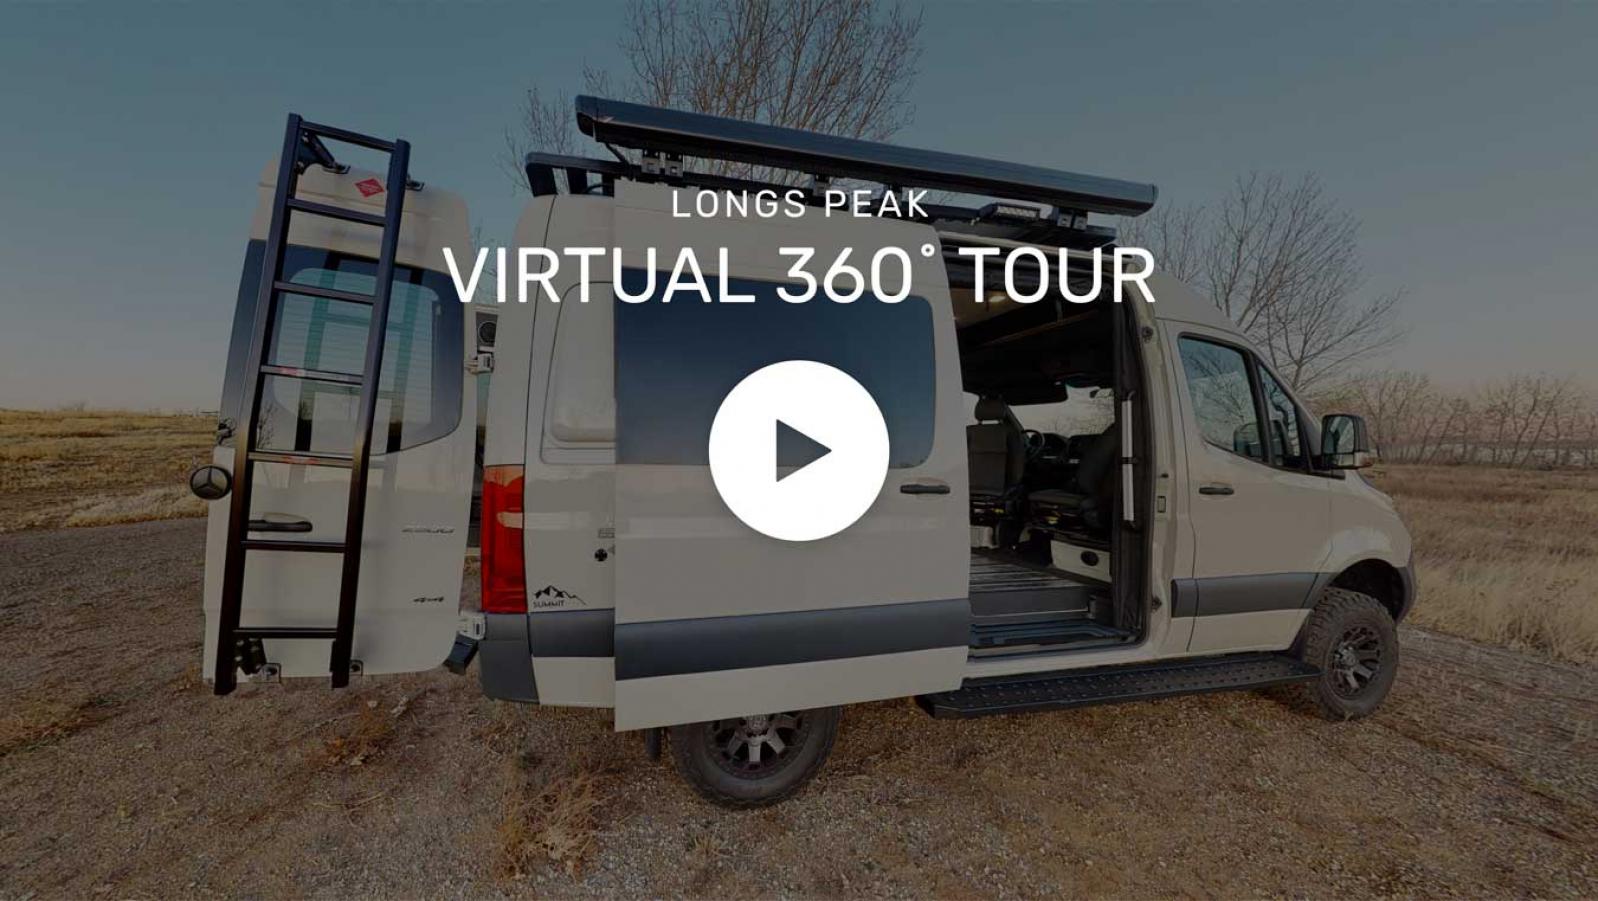 A preview image for the matterport virtual tour